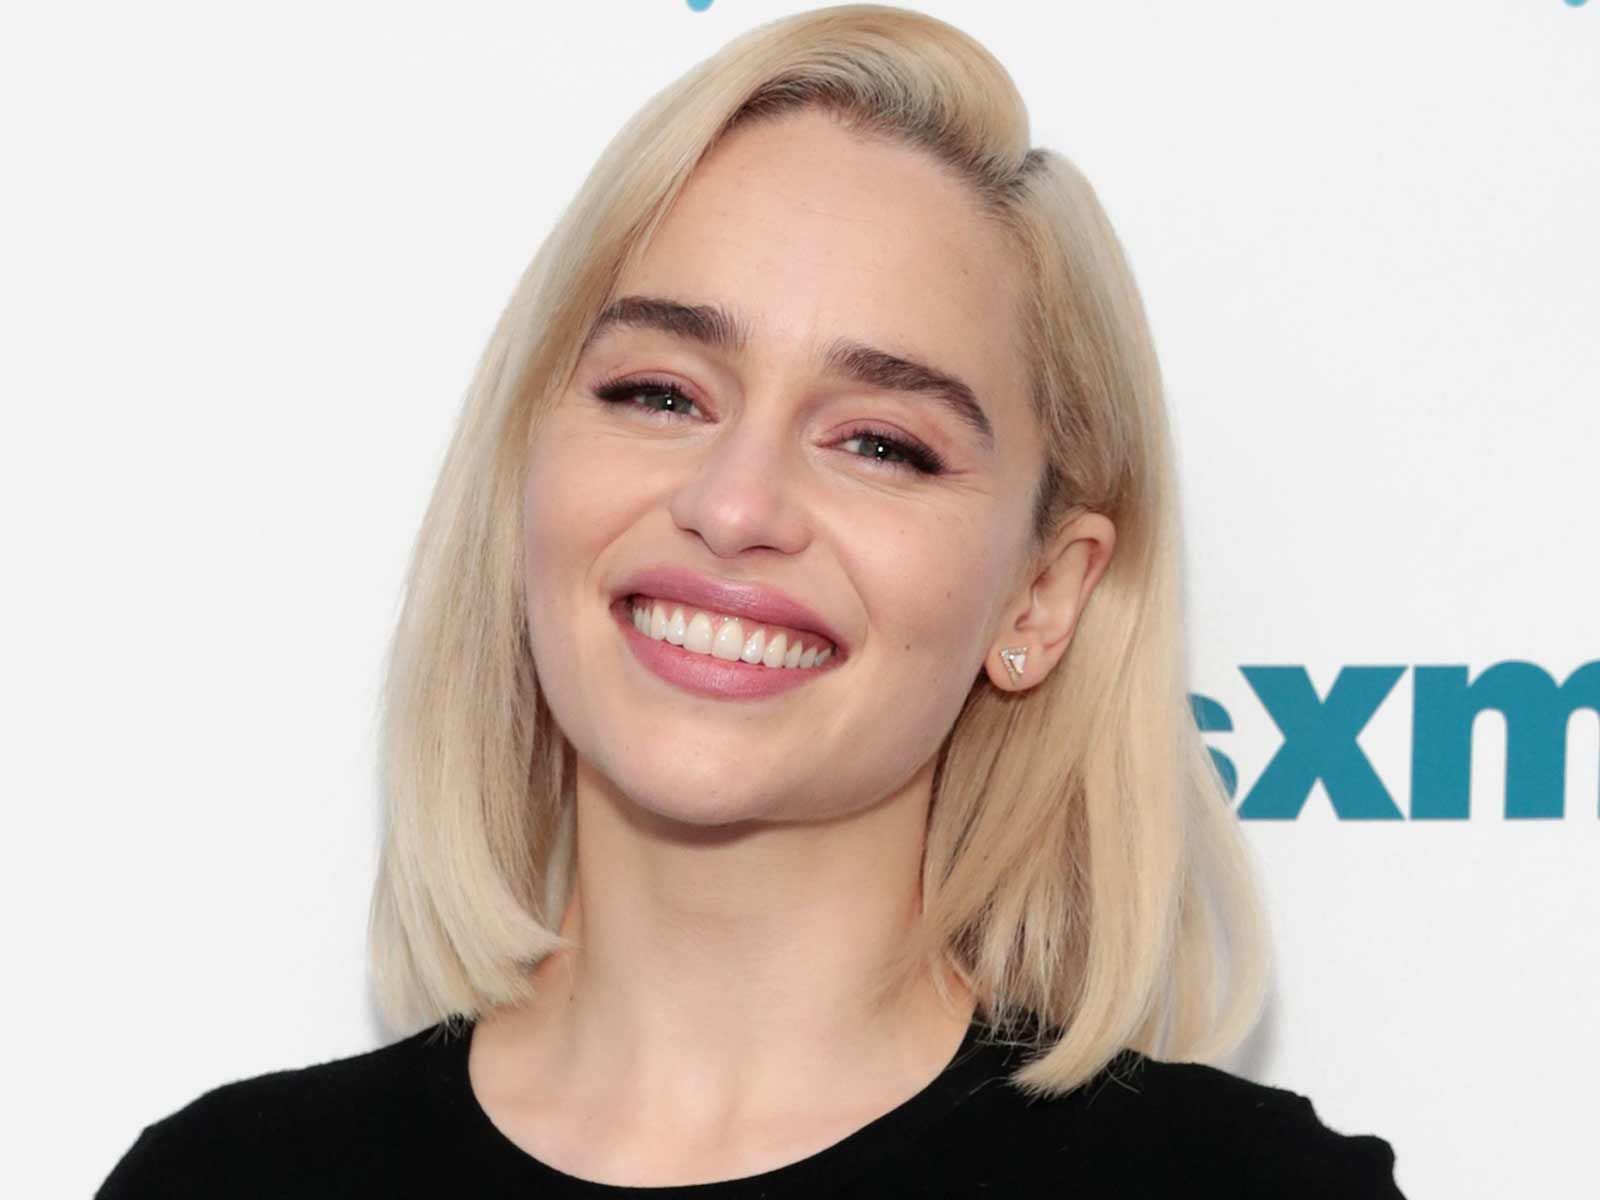 Emilia Clarke Got An Awesome Game Of Thrones Tattoo